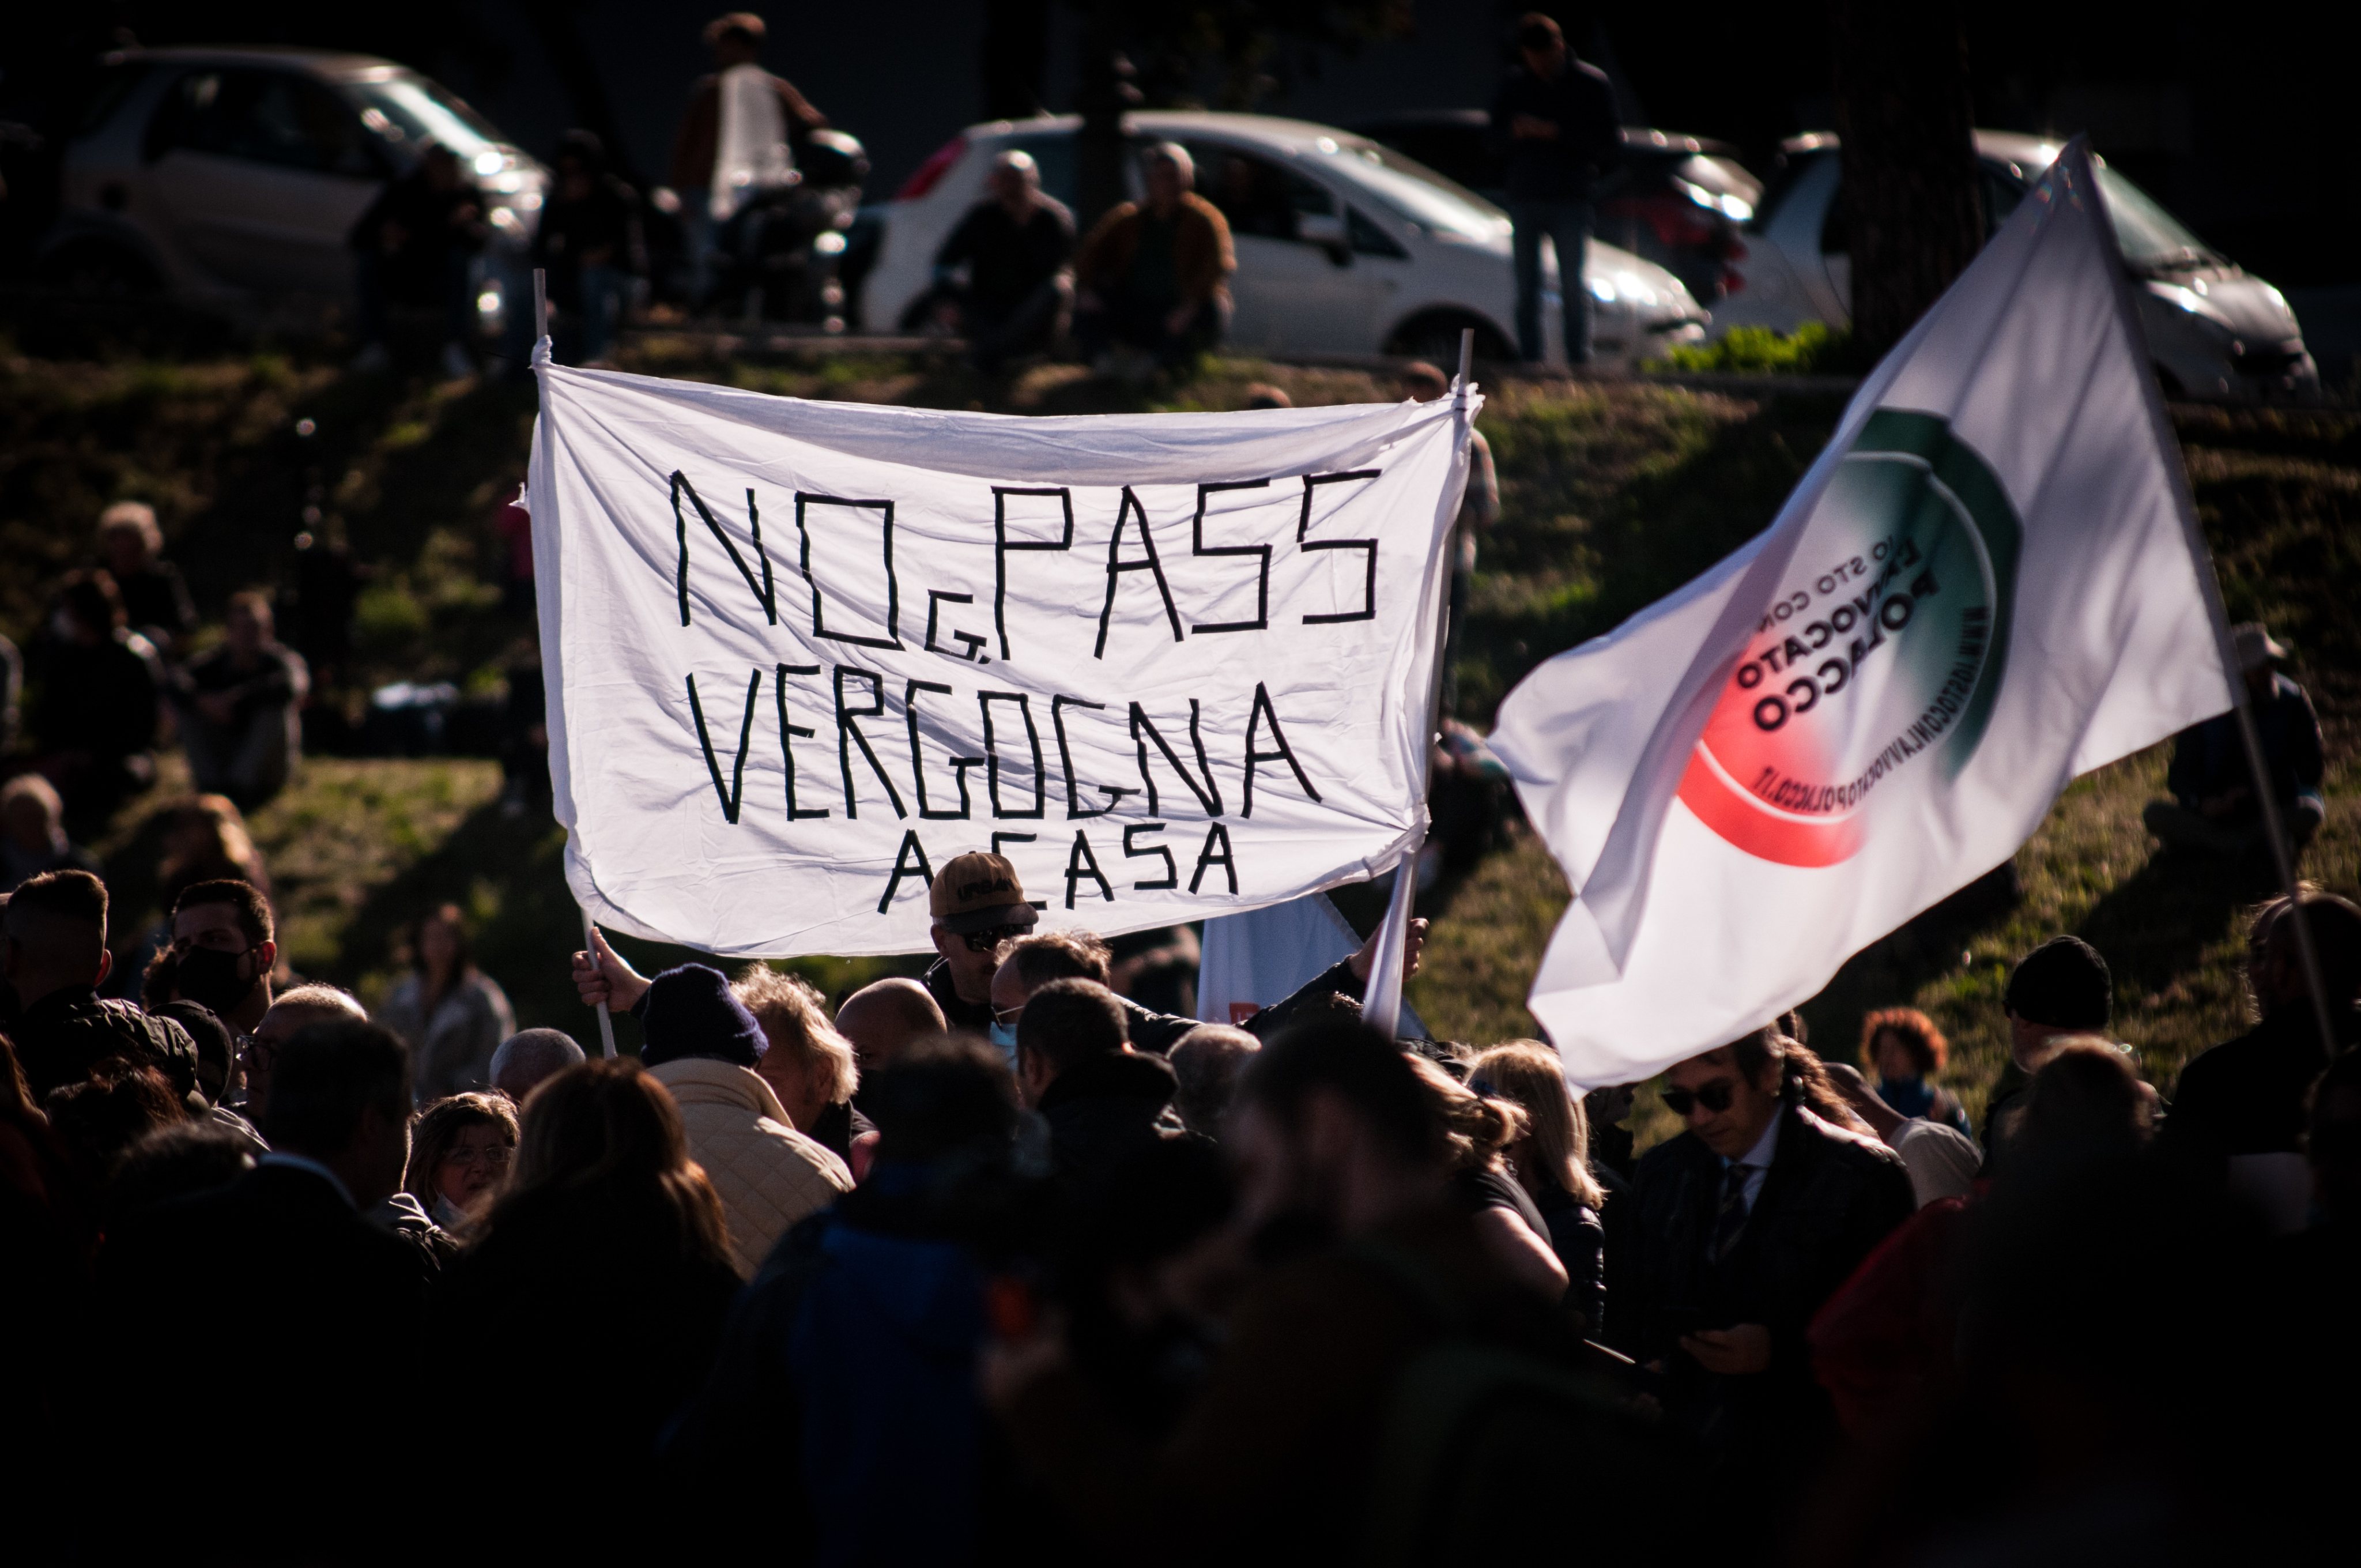 No Green Pass Demonstration In Rome